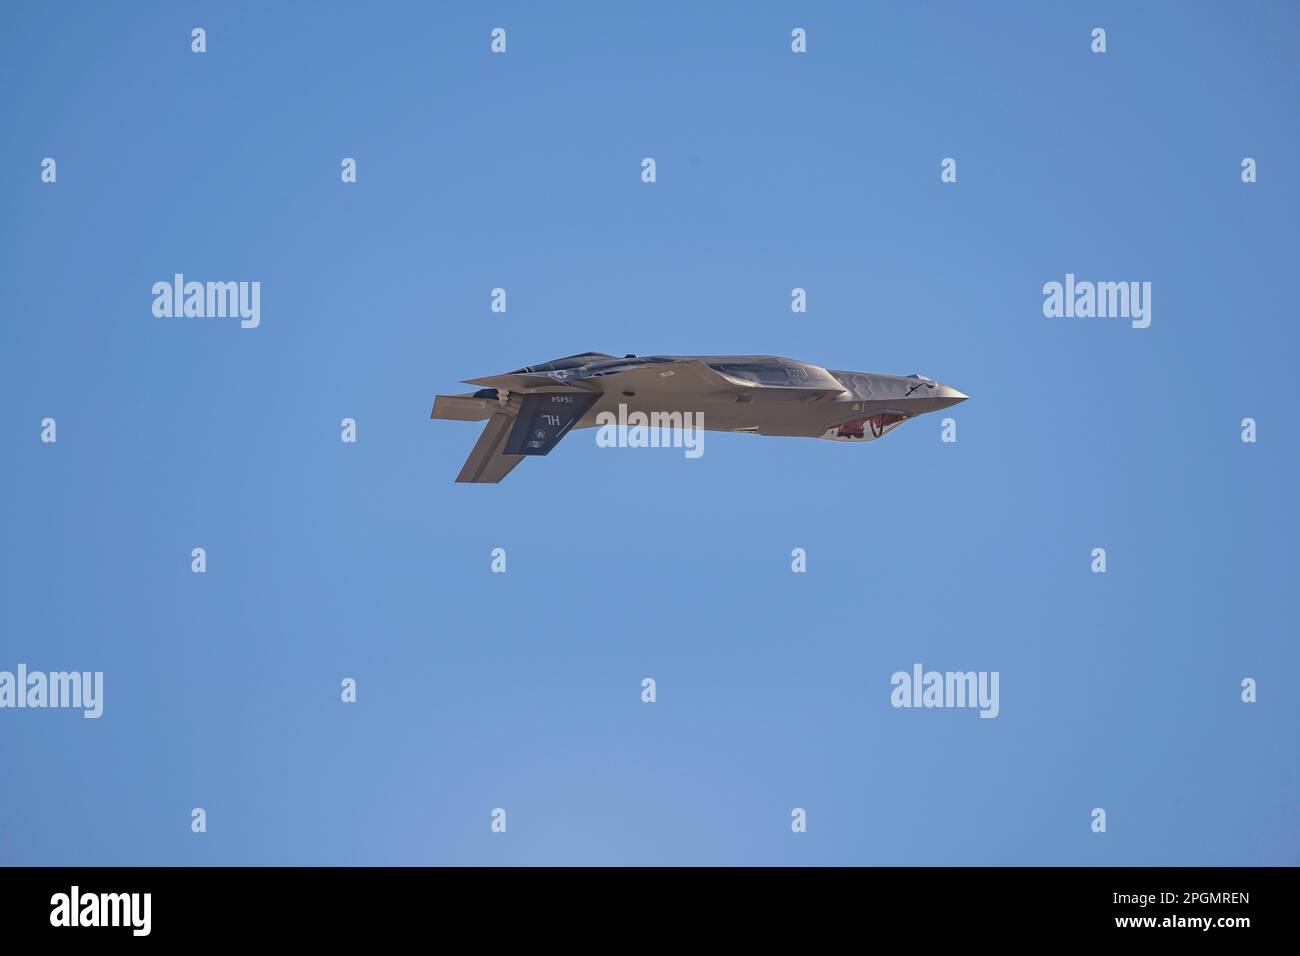 Las Vegas, NV - November 6, 2022: USAF F-35 Lightning II 5th Generation Fighter Jet Does a Demo during the Aviation Nation airshow at Nellis AFB. Stock Photo